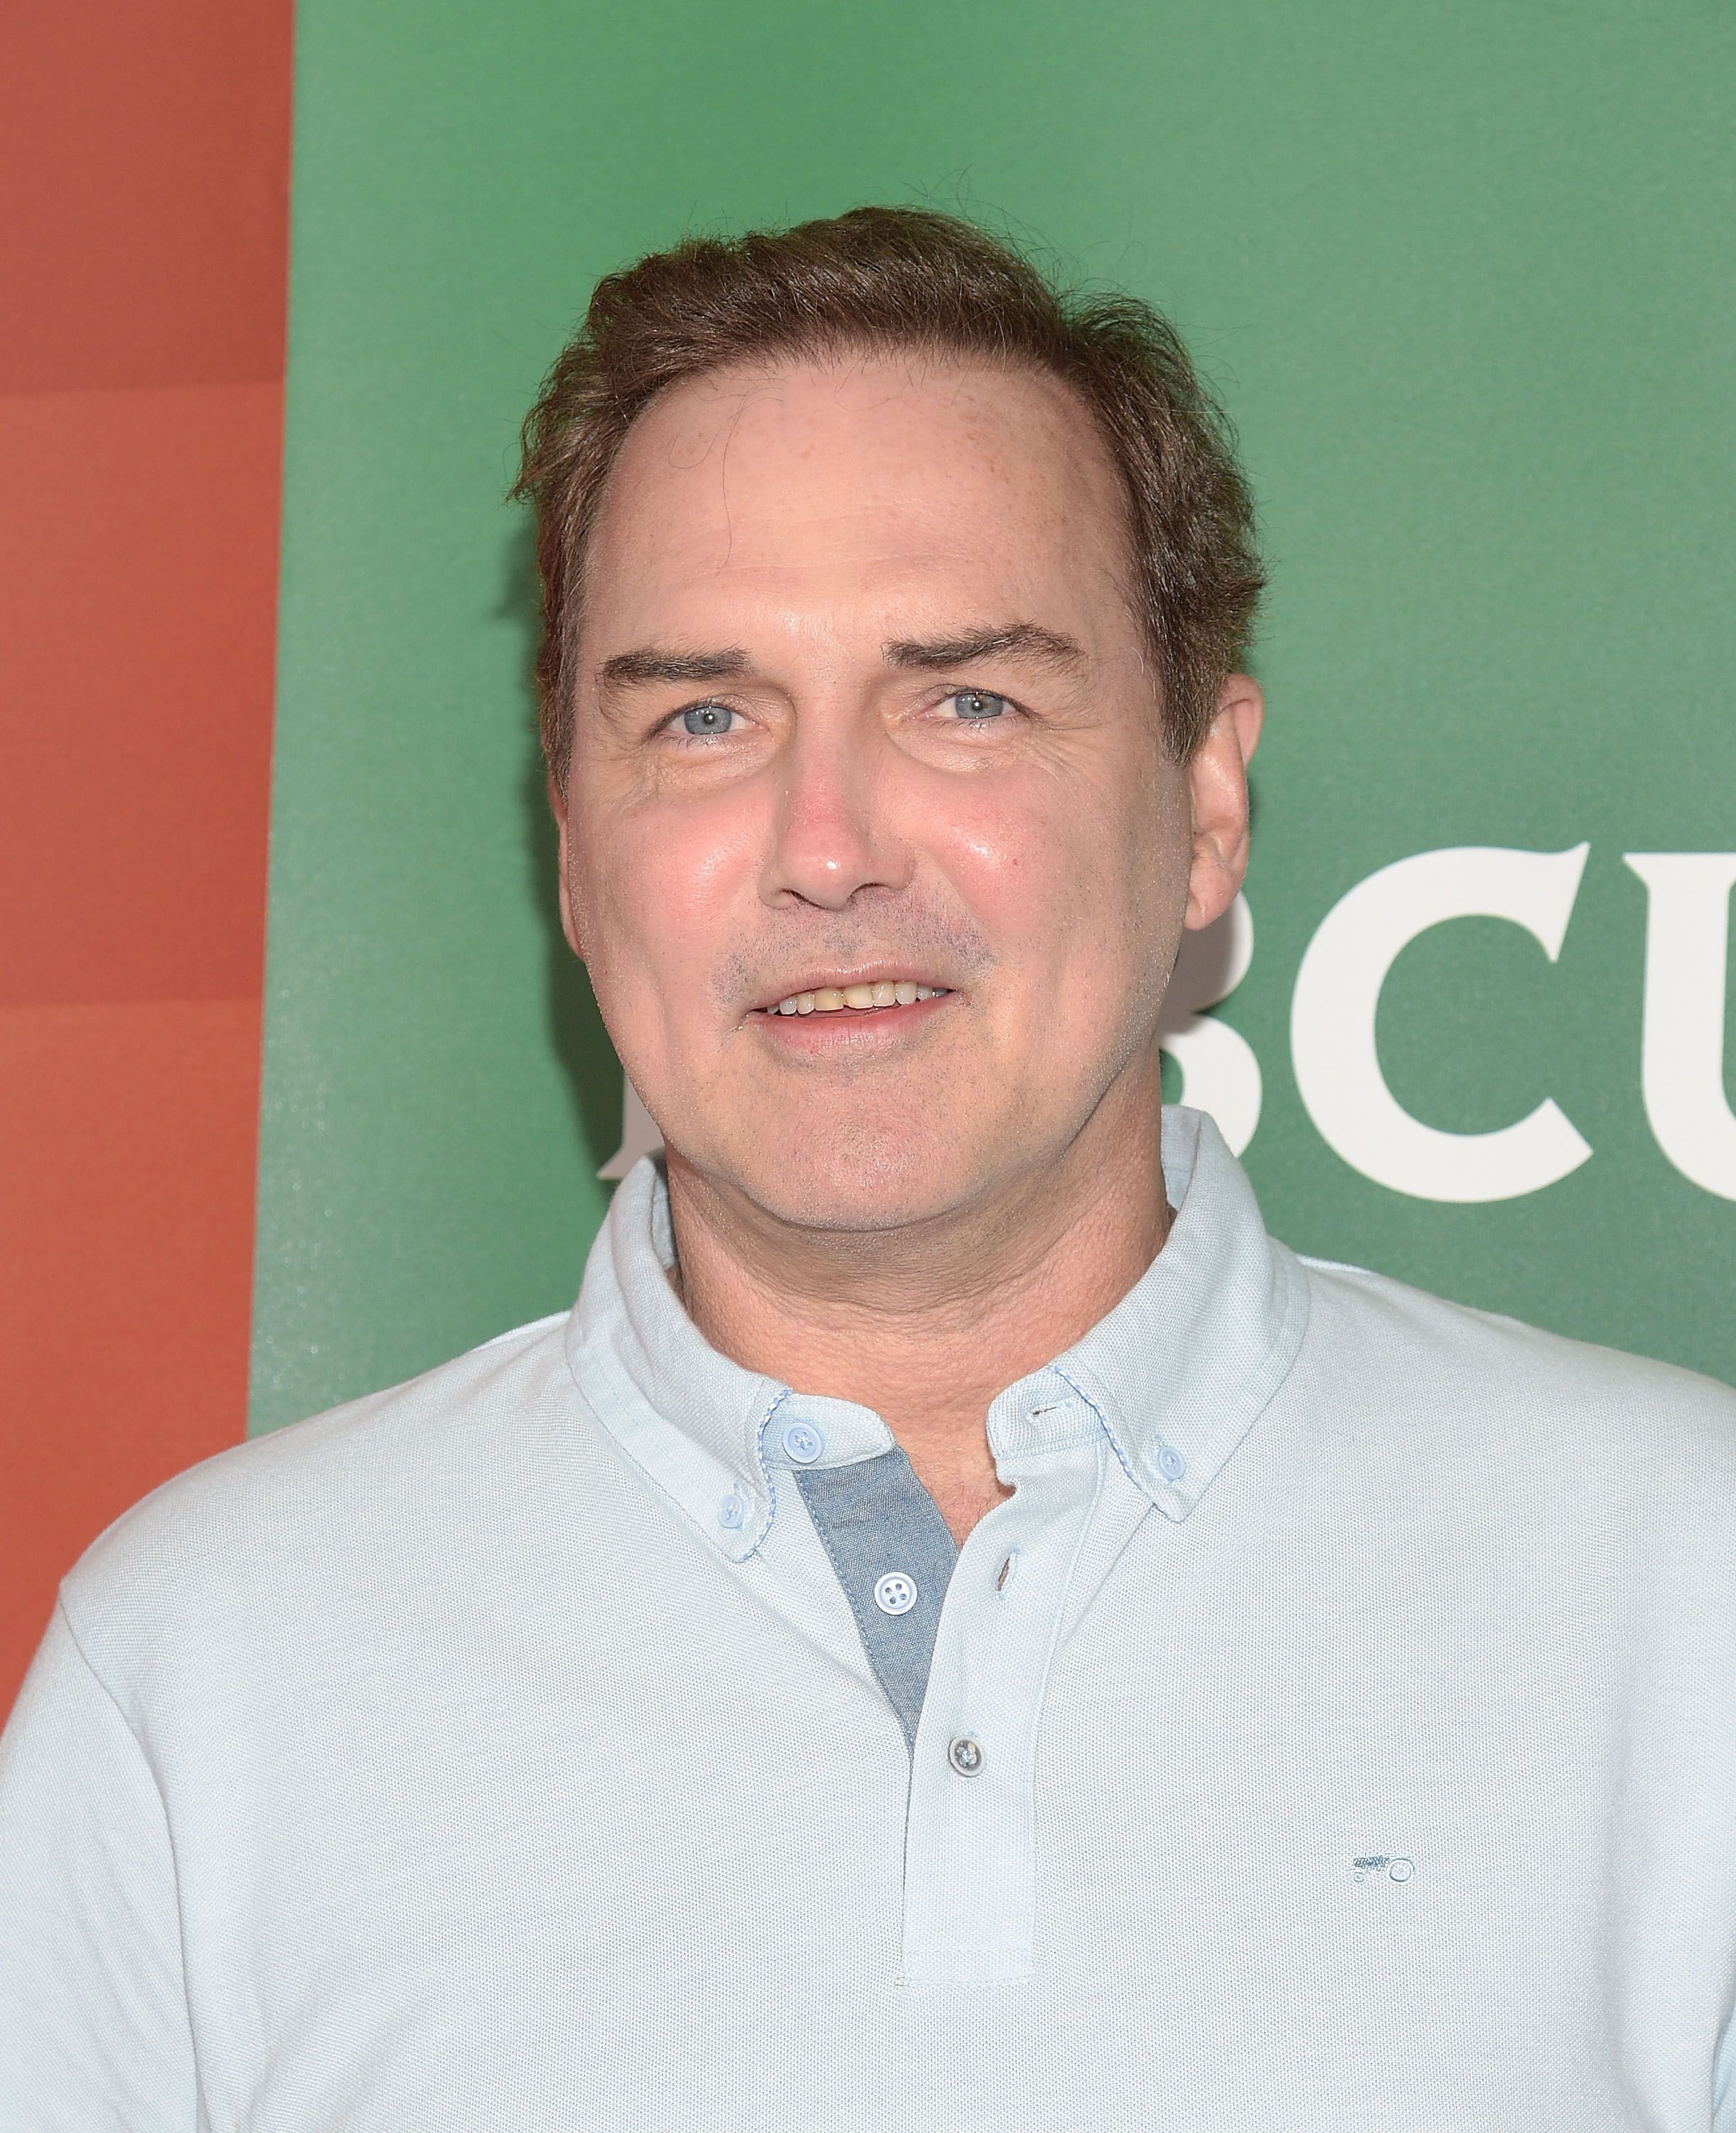 Norm MacDonald at the 2015 NBCUniversal Summer Press Day held at the The Langham Huntington Hotel and Spa in Pasadena, California | Photo: Jeffrey Mayer/WireImage via Getty Images